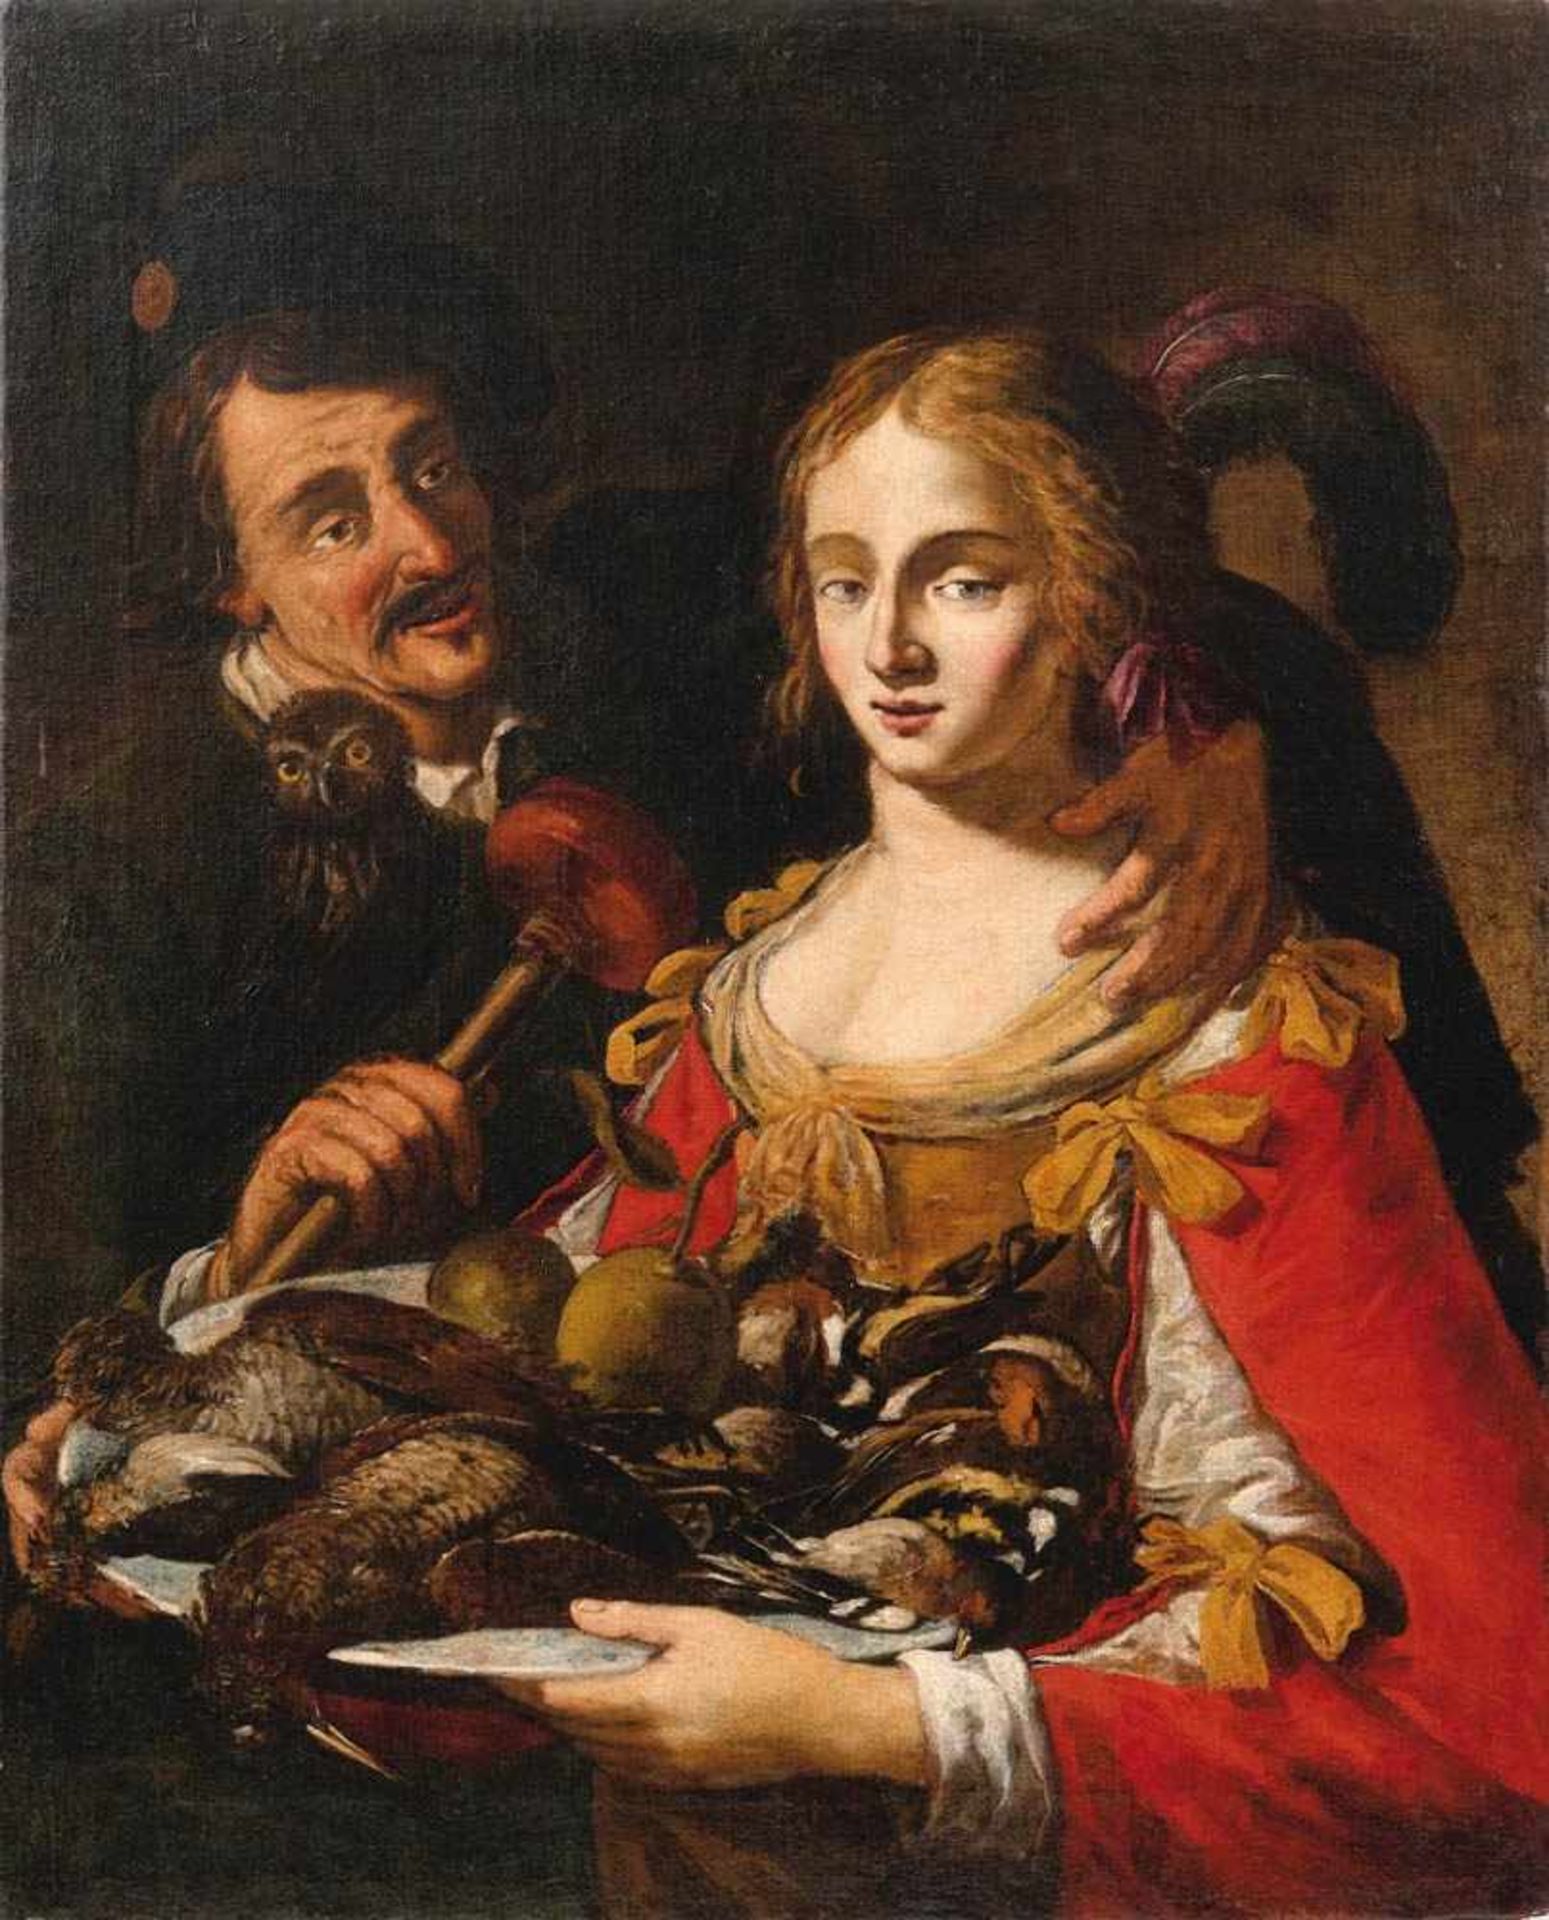 Hunter and Maid with killed wild Birds